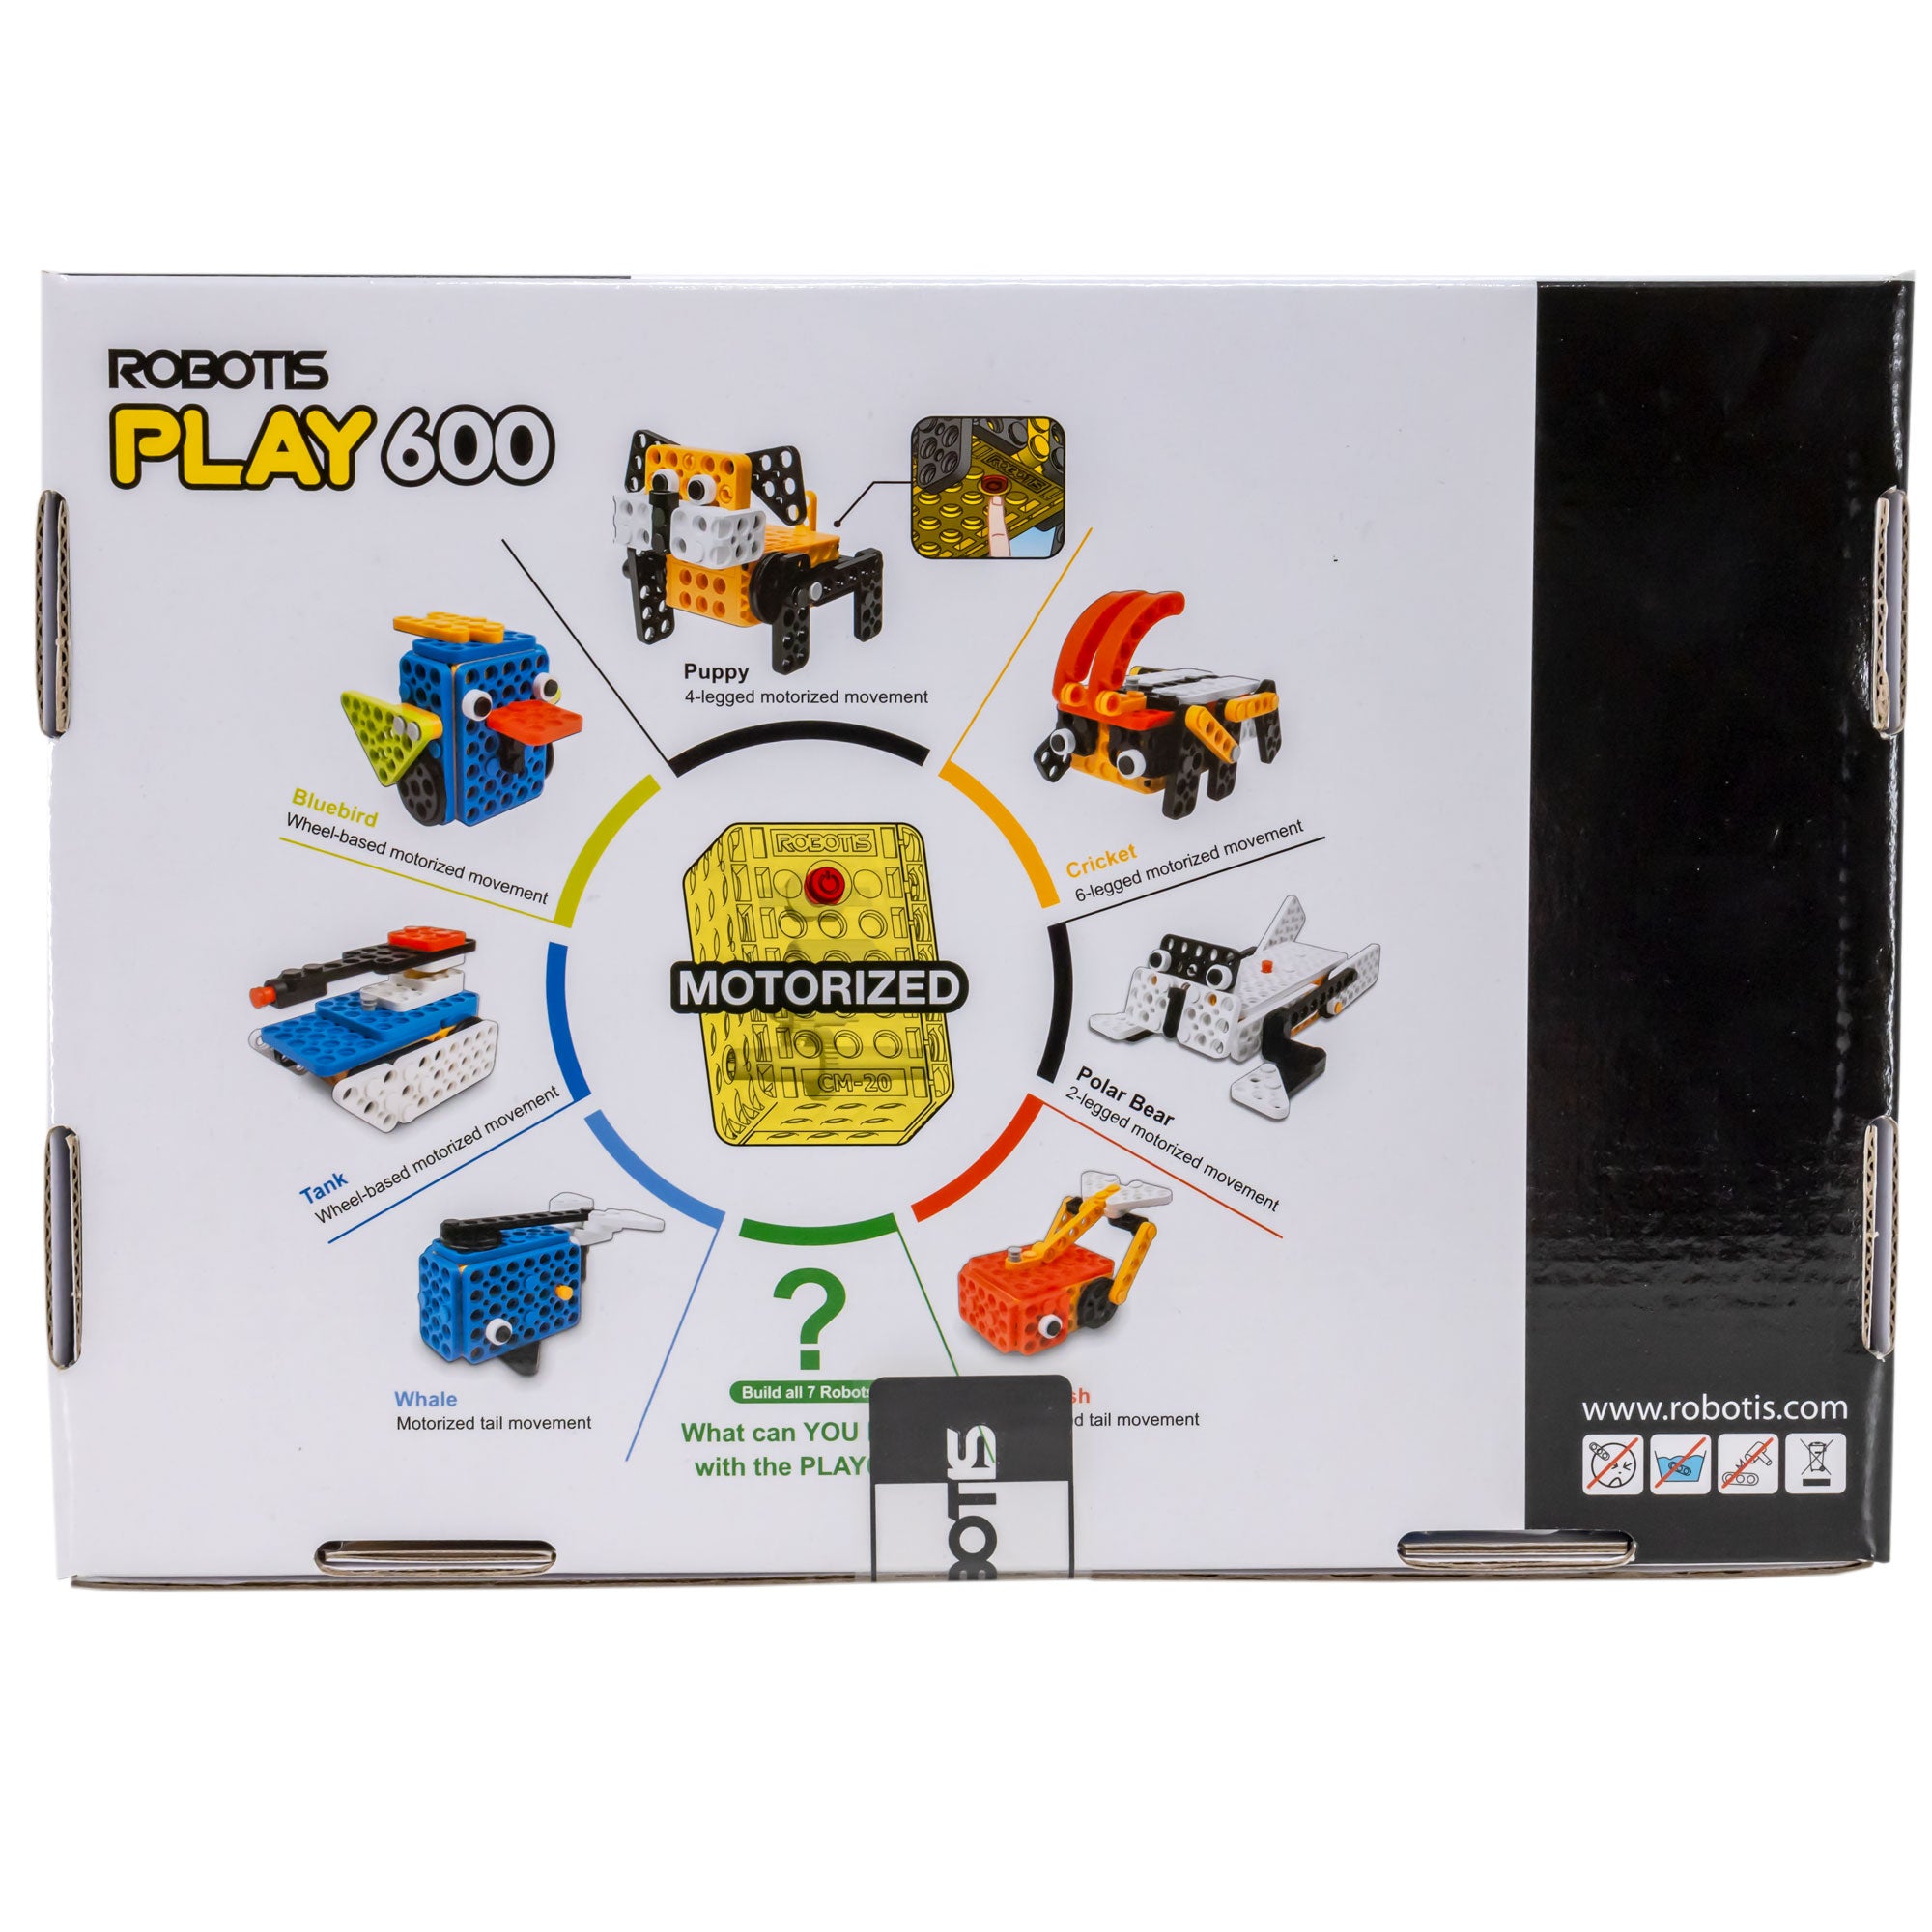 Robotis Play 600 Pets box back showing the project build options, including a whale, tank, bluebird, puppy, cricket, polar bear, and goldfish. Thes all surround the motorized yellow piece on a white background.